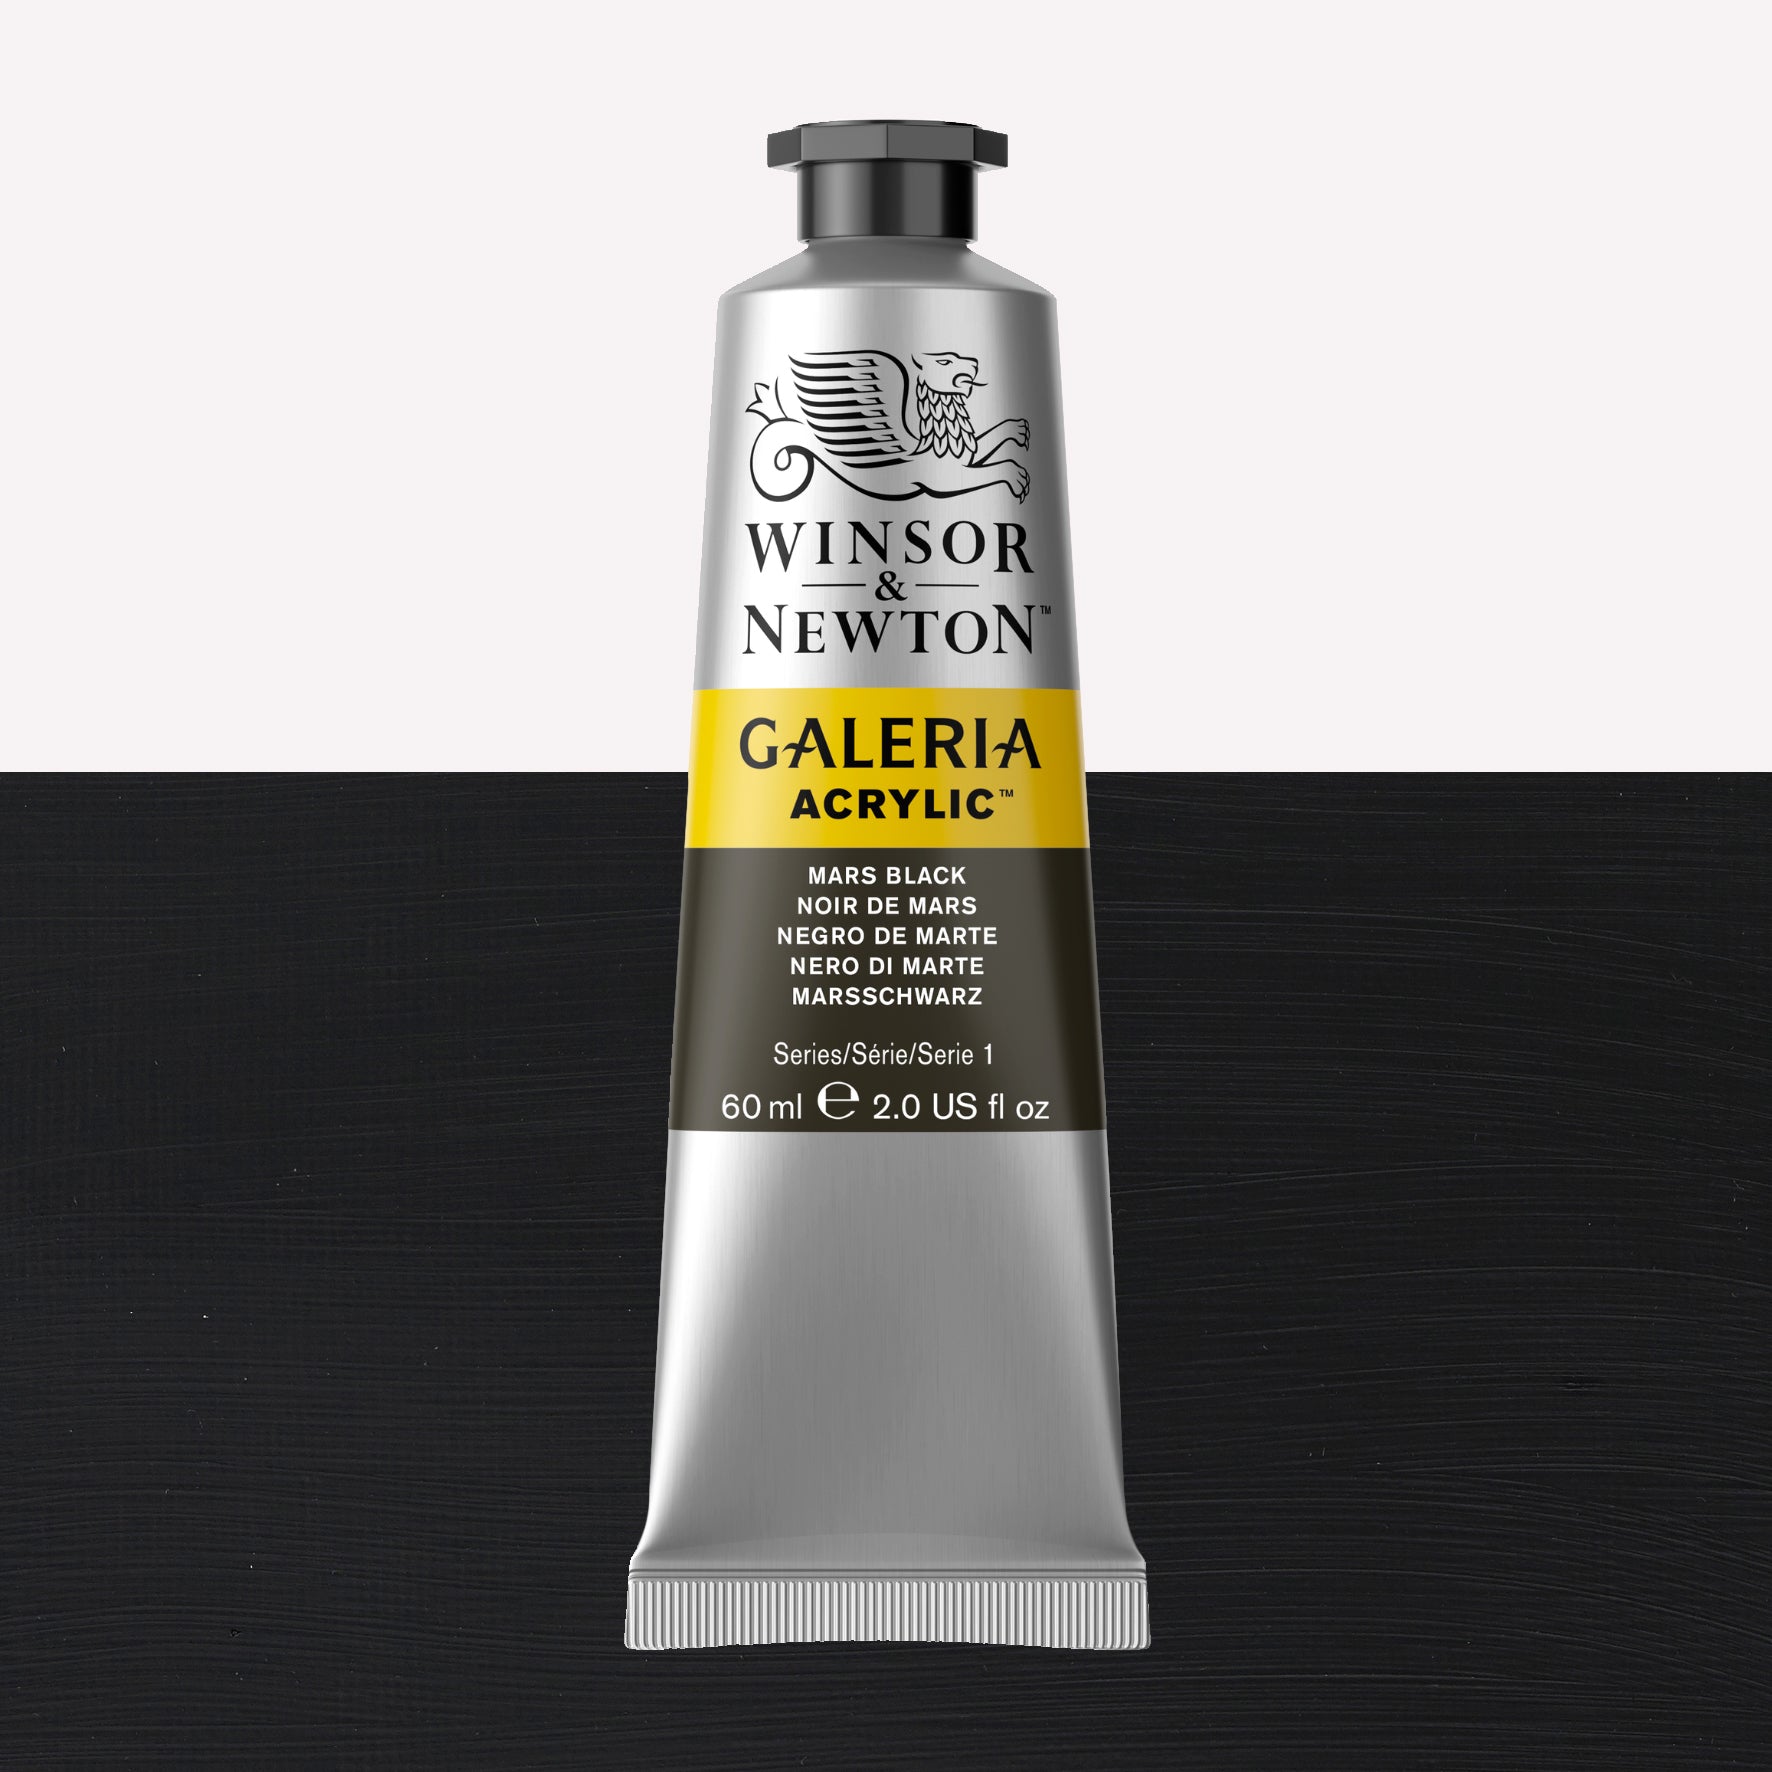 A 60ml tube of vibrant Galeria Acrylic paint in the shade Mars Black. This professional-quality paint is packaged in a silver tube with a black lid. Made by Winsor and Newton.